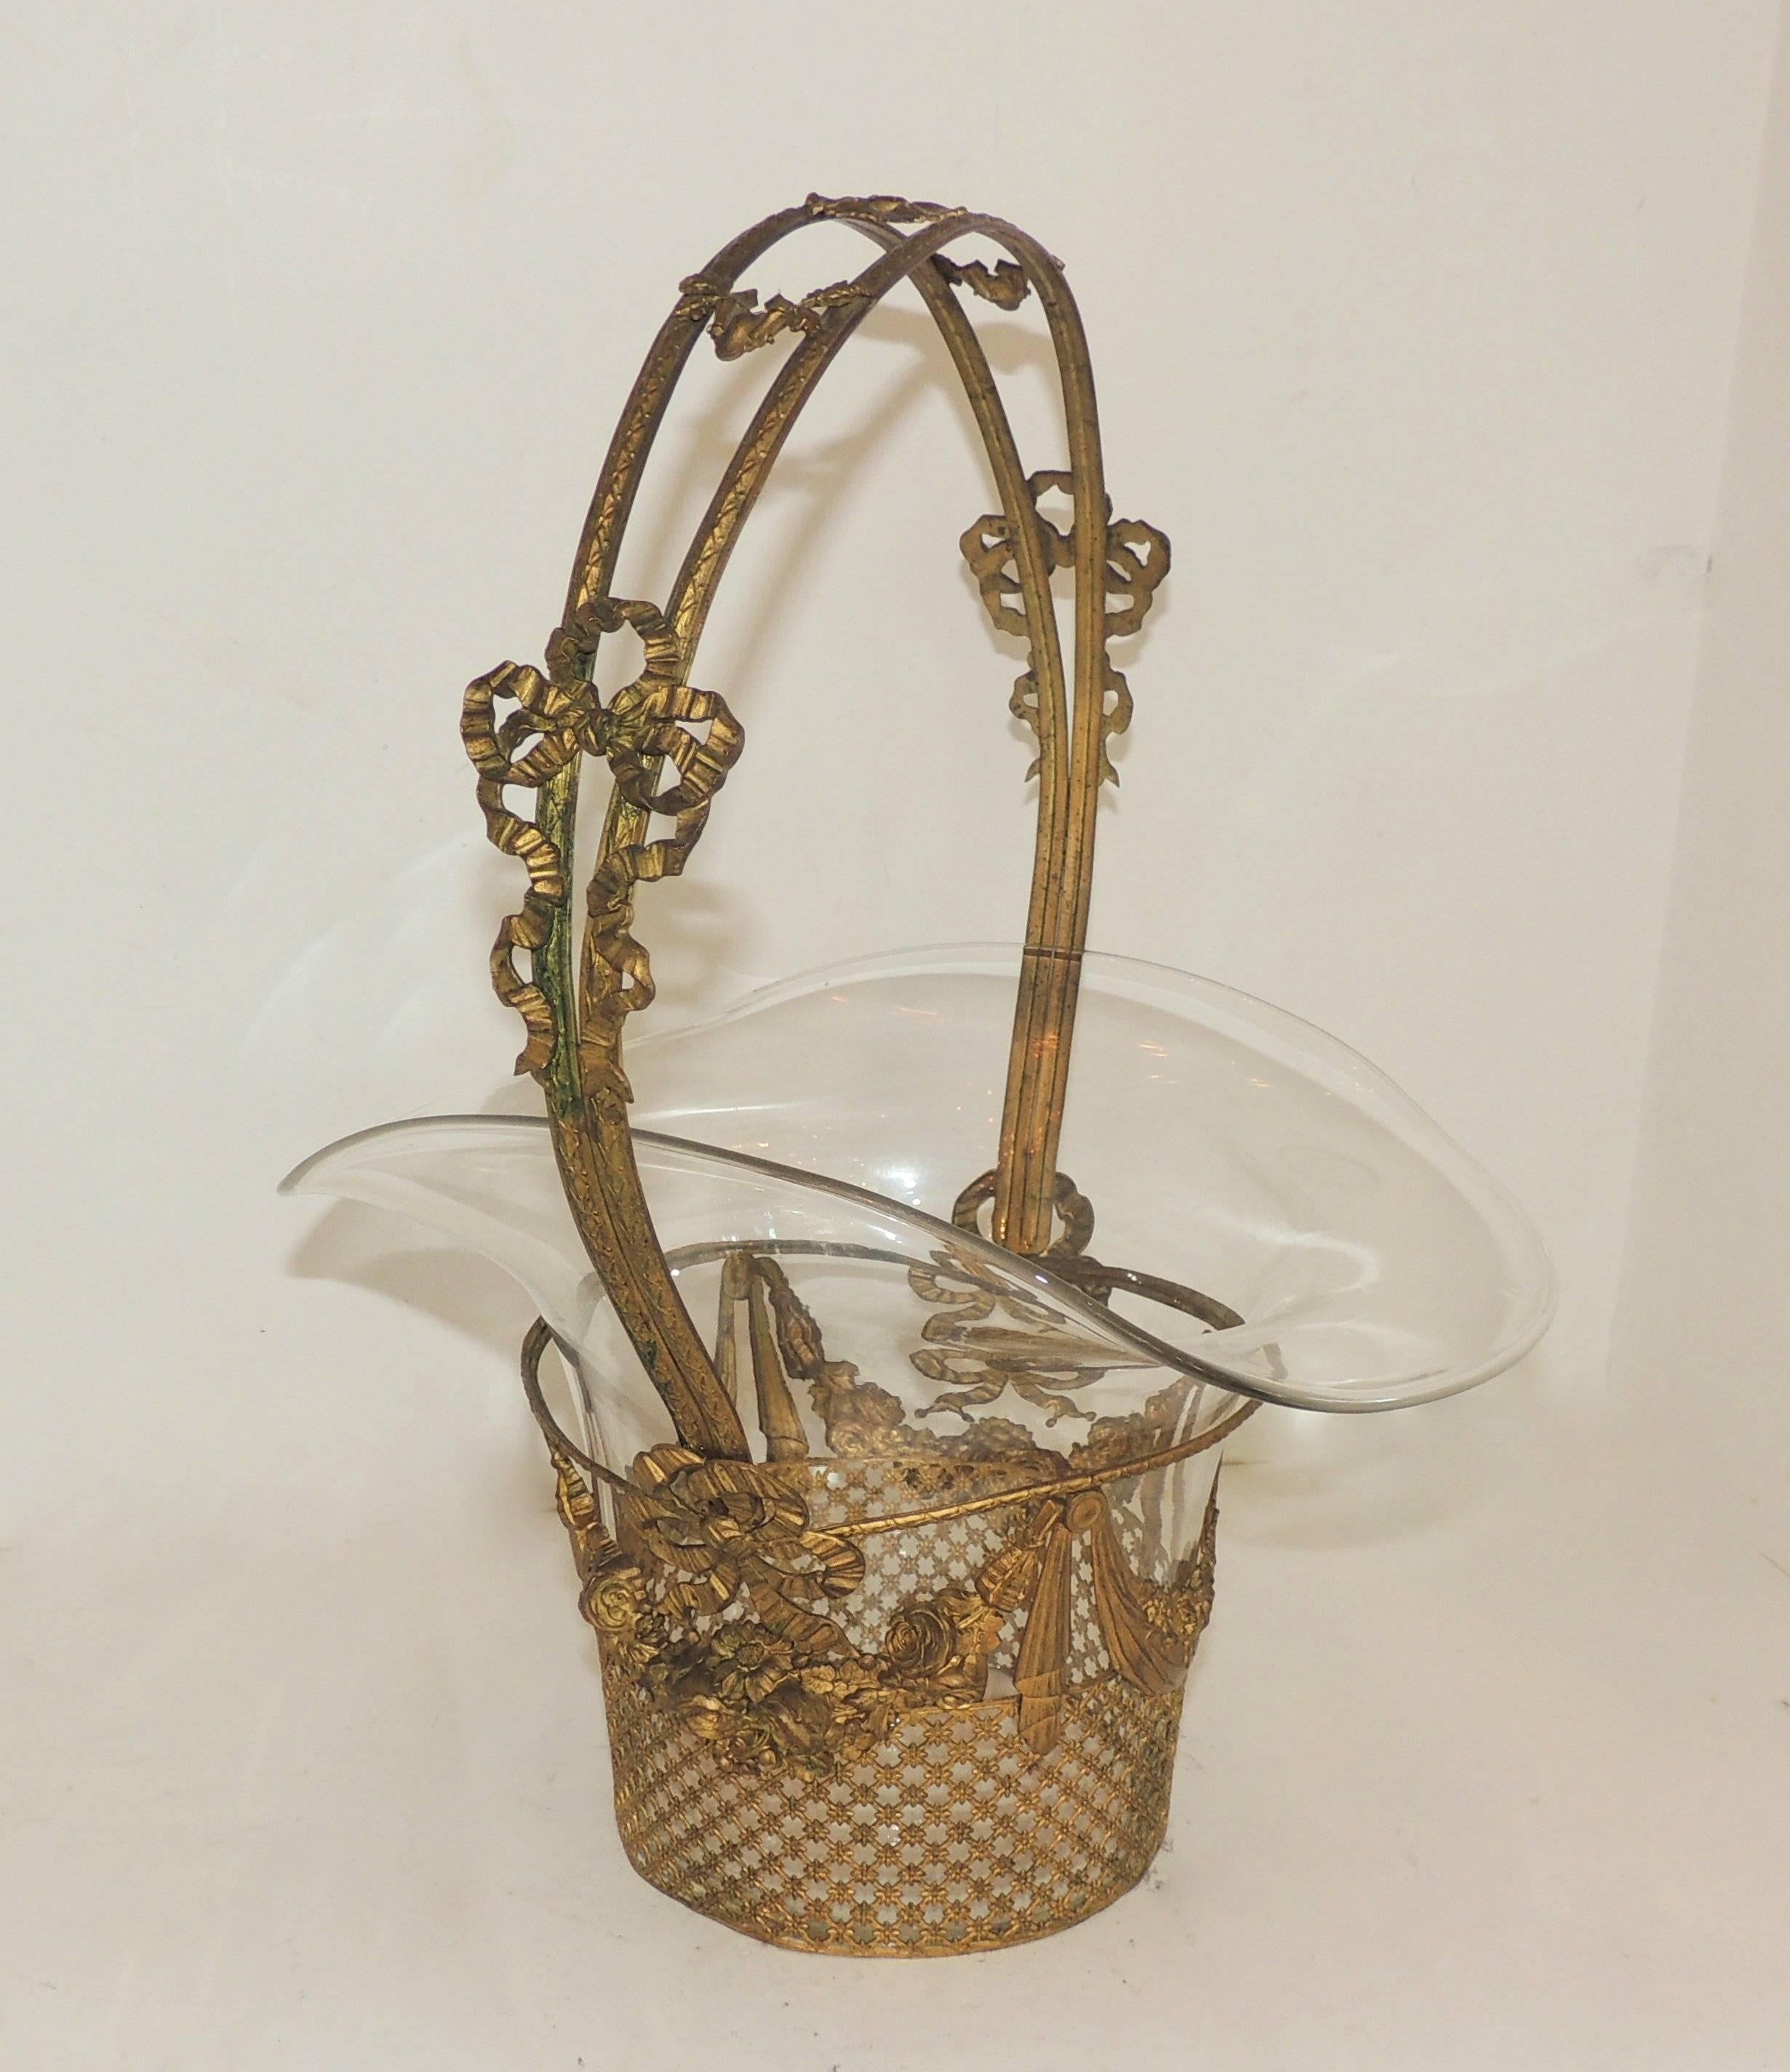 Wonderful antique centerpiece doré bronze open weave basket with floral bows and curved crystal glass insert.

Measures: 12.5" H x 10" D x 9.75" W.
Insert: 7.5" W x 10" L x 7" D.